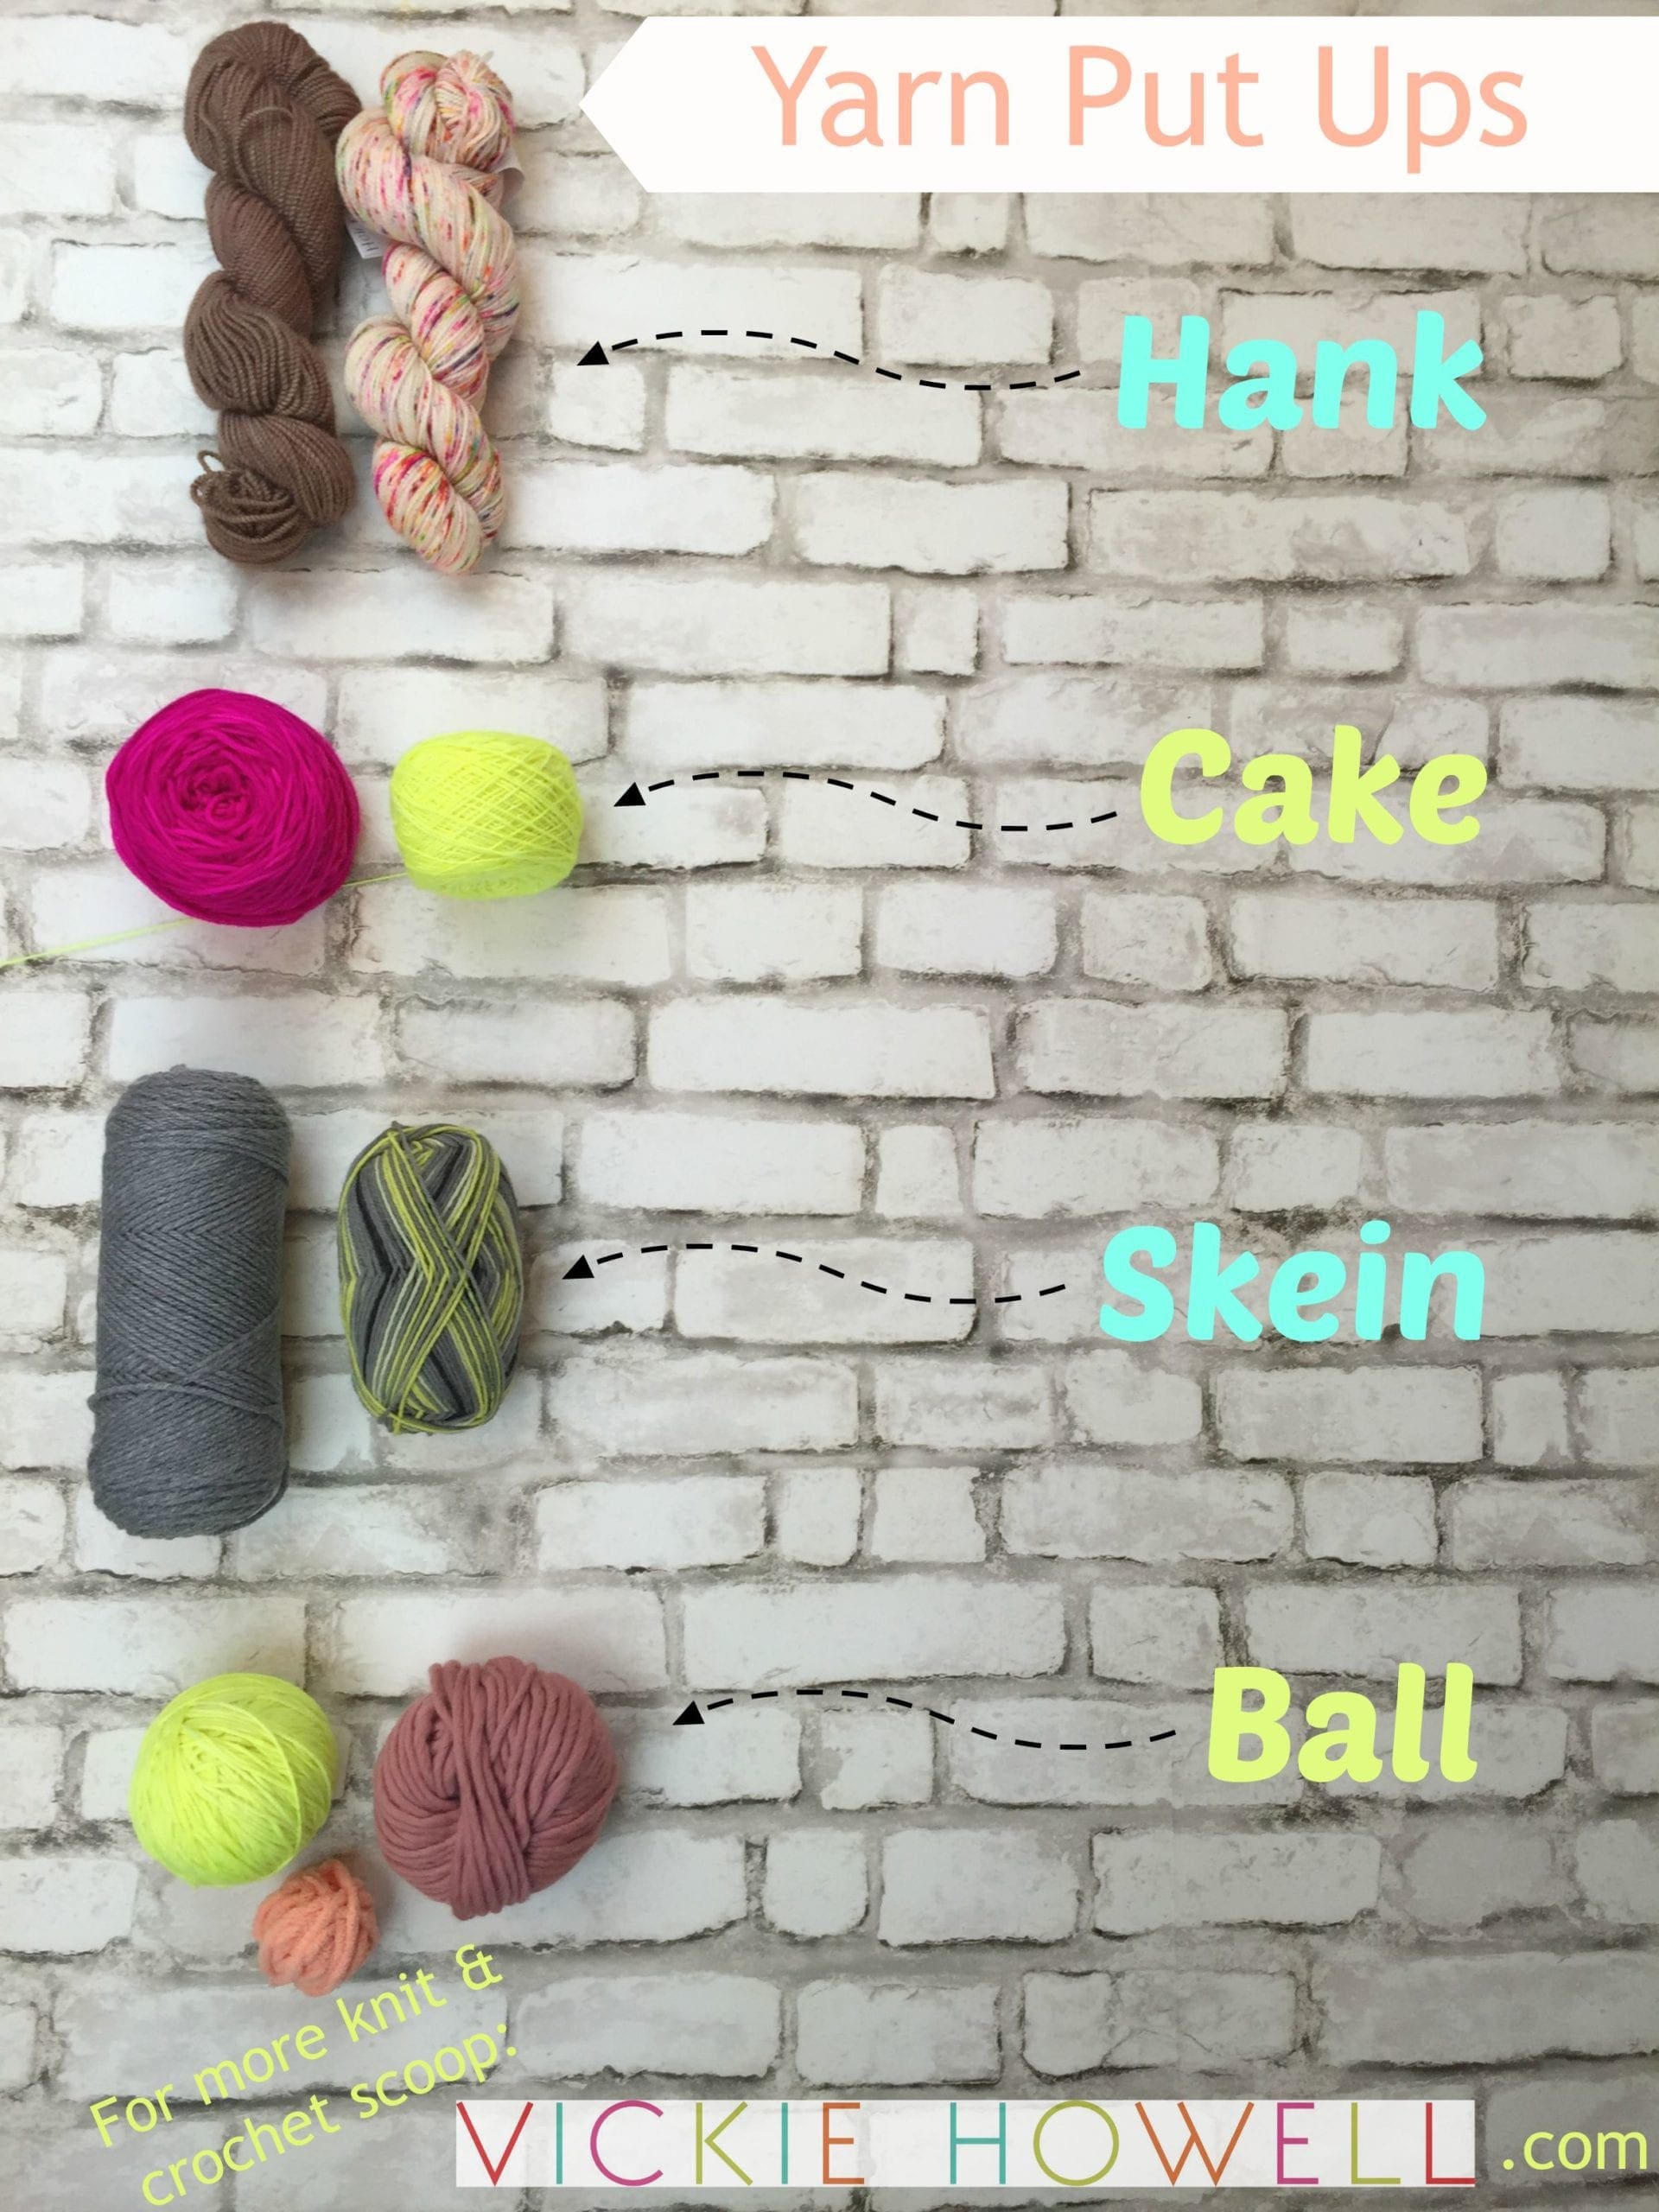 Yarn Ball Types - All you need to know